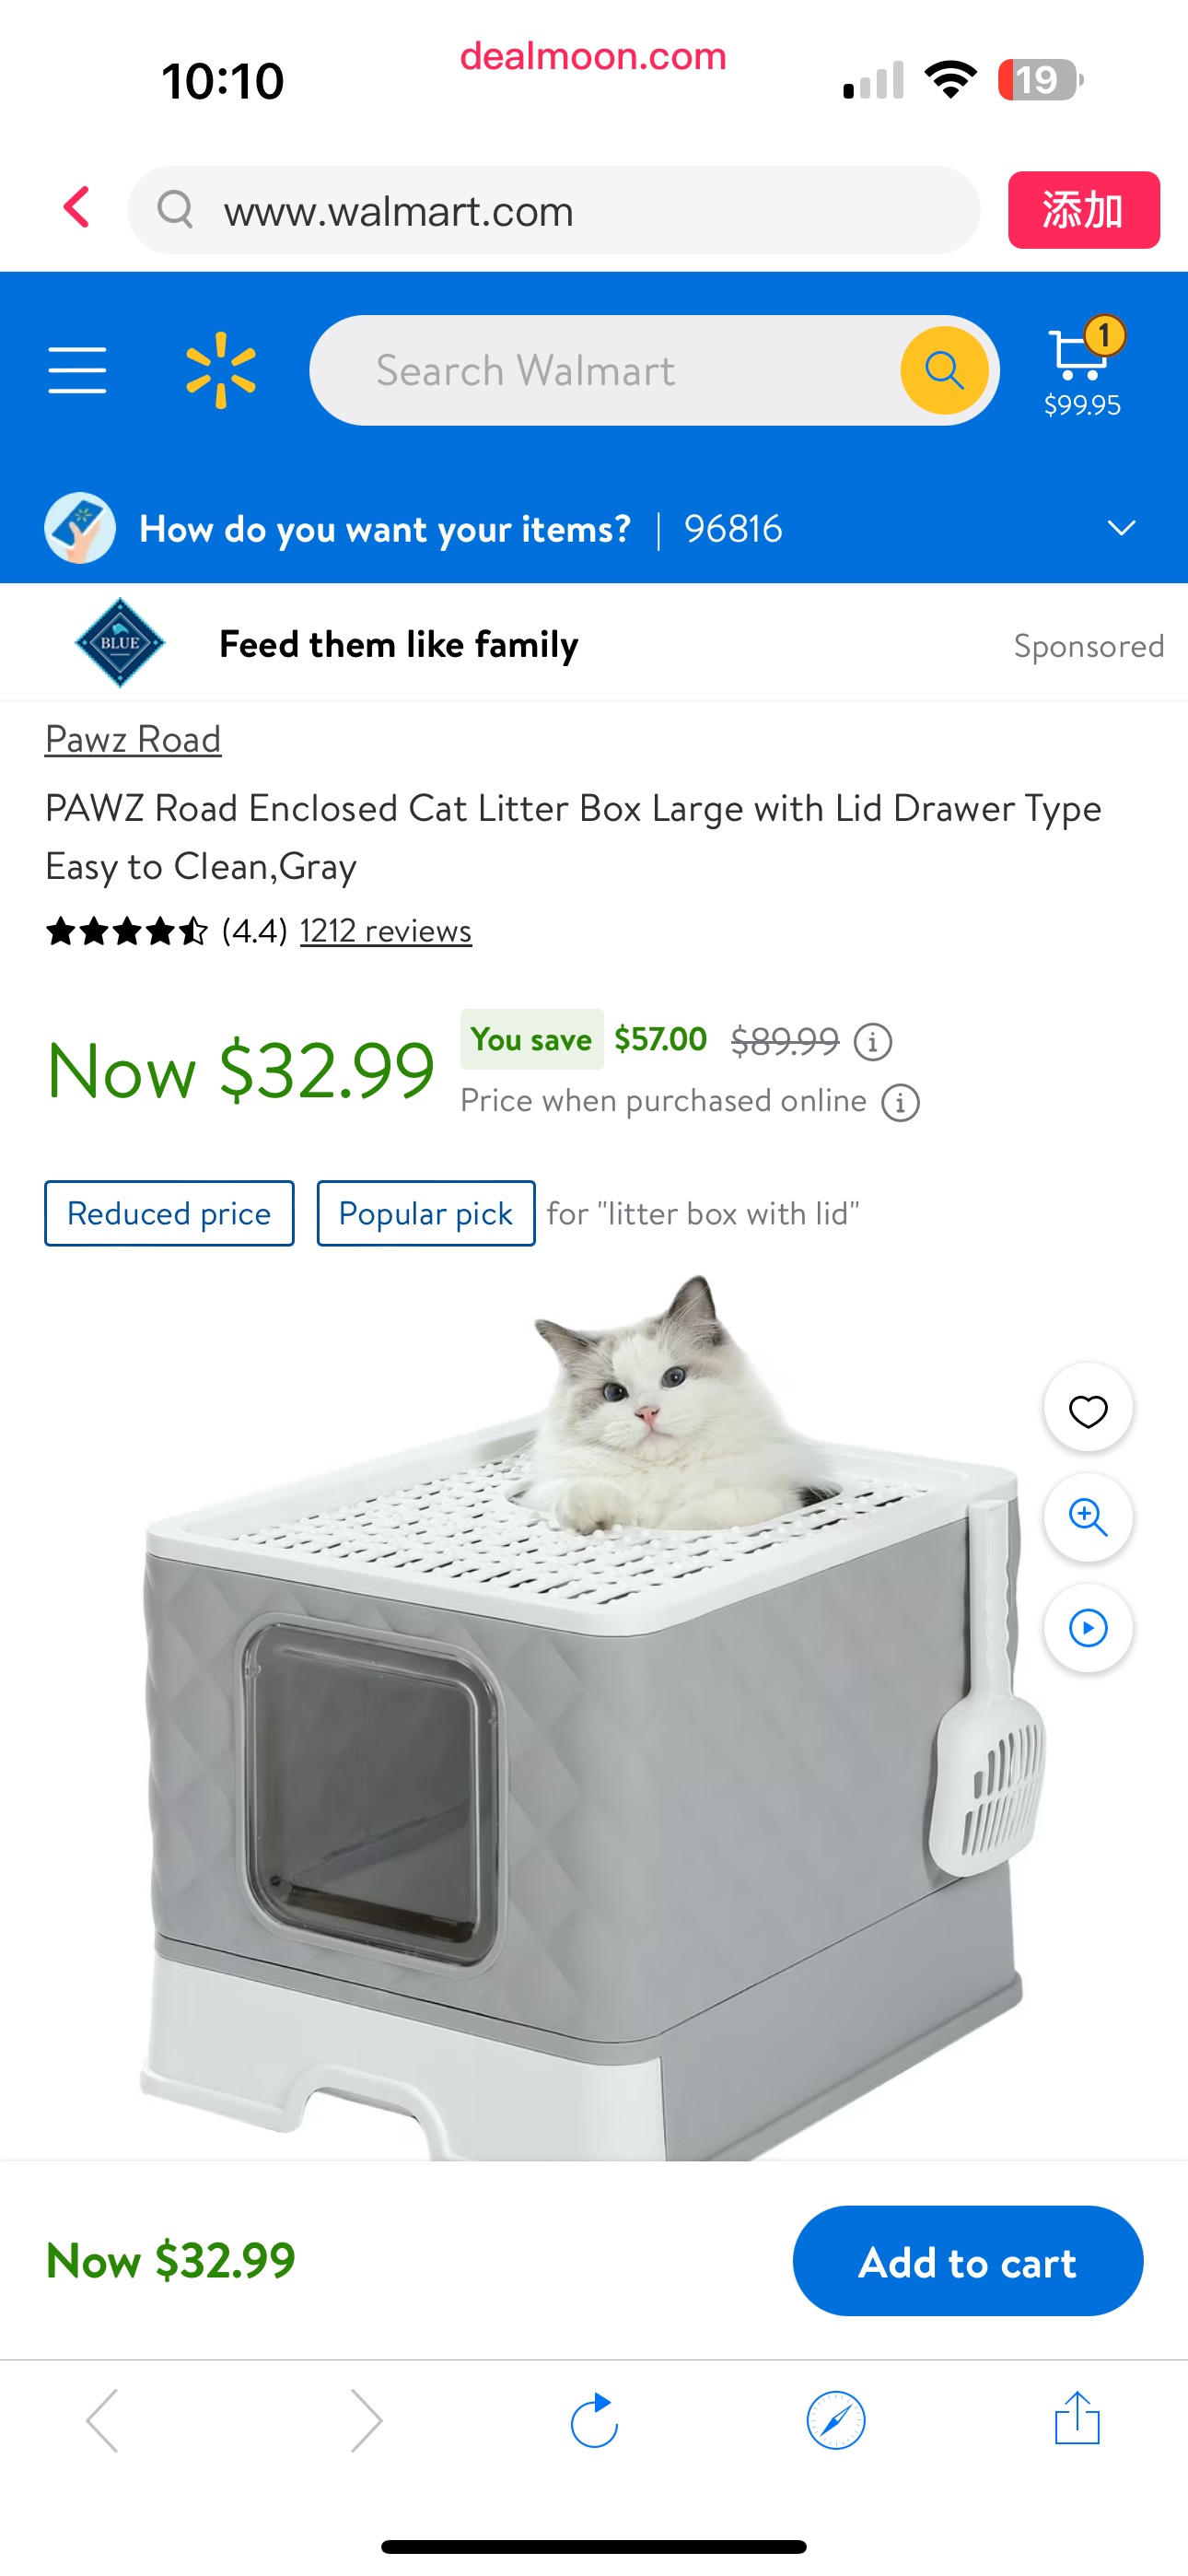 PAWZ Road Enclosed Cat Litter Box Large with Lid Drawer Type Easy to Clean,Gray - Walmart.com猫砂盆